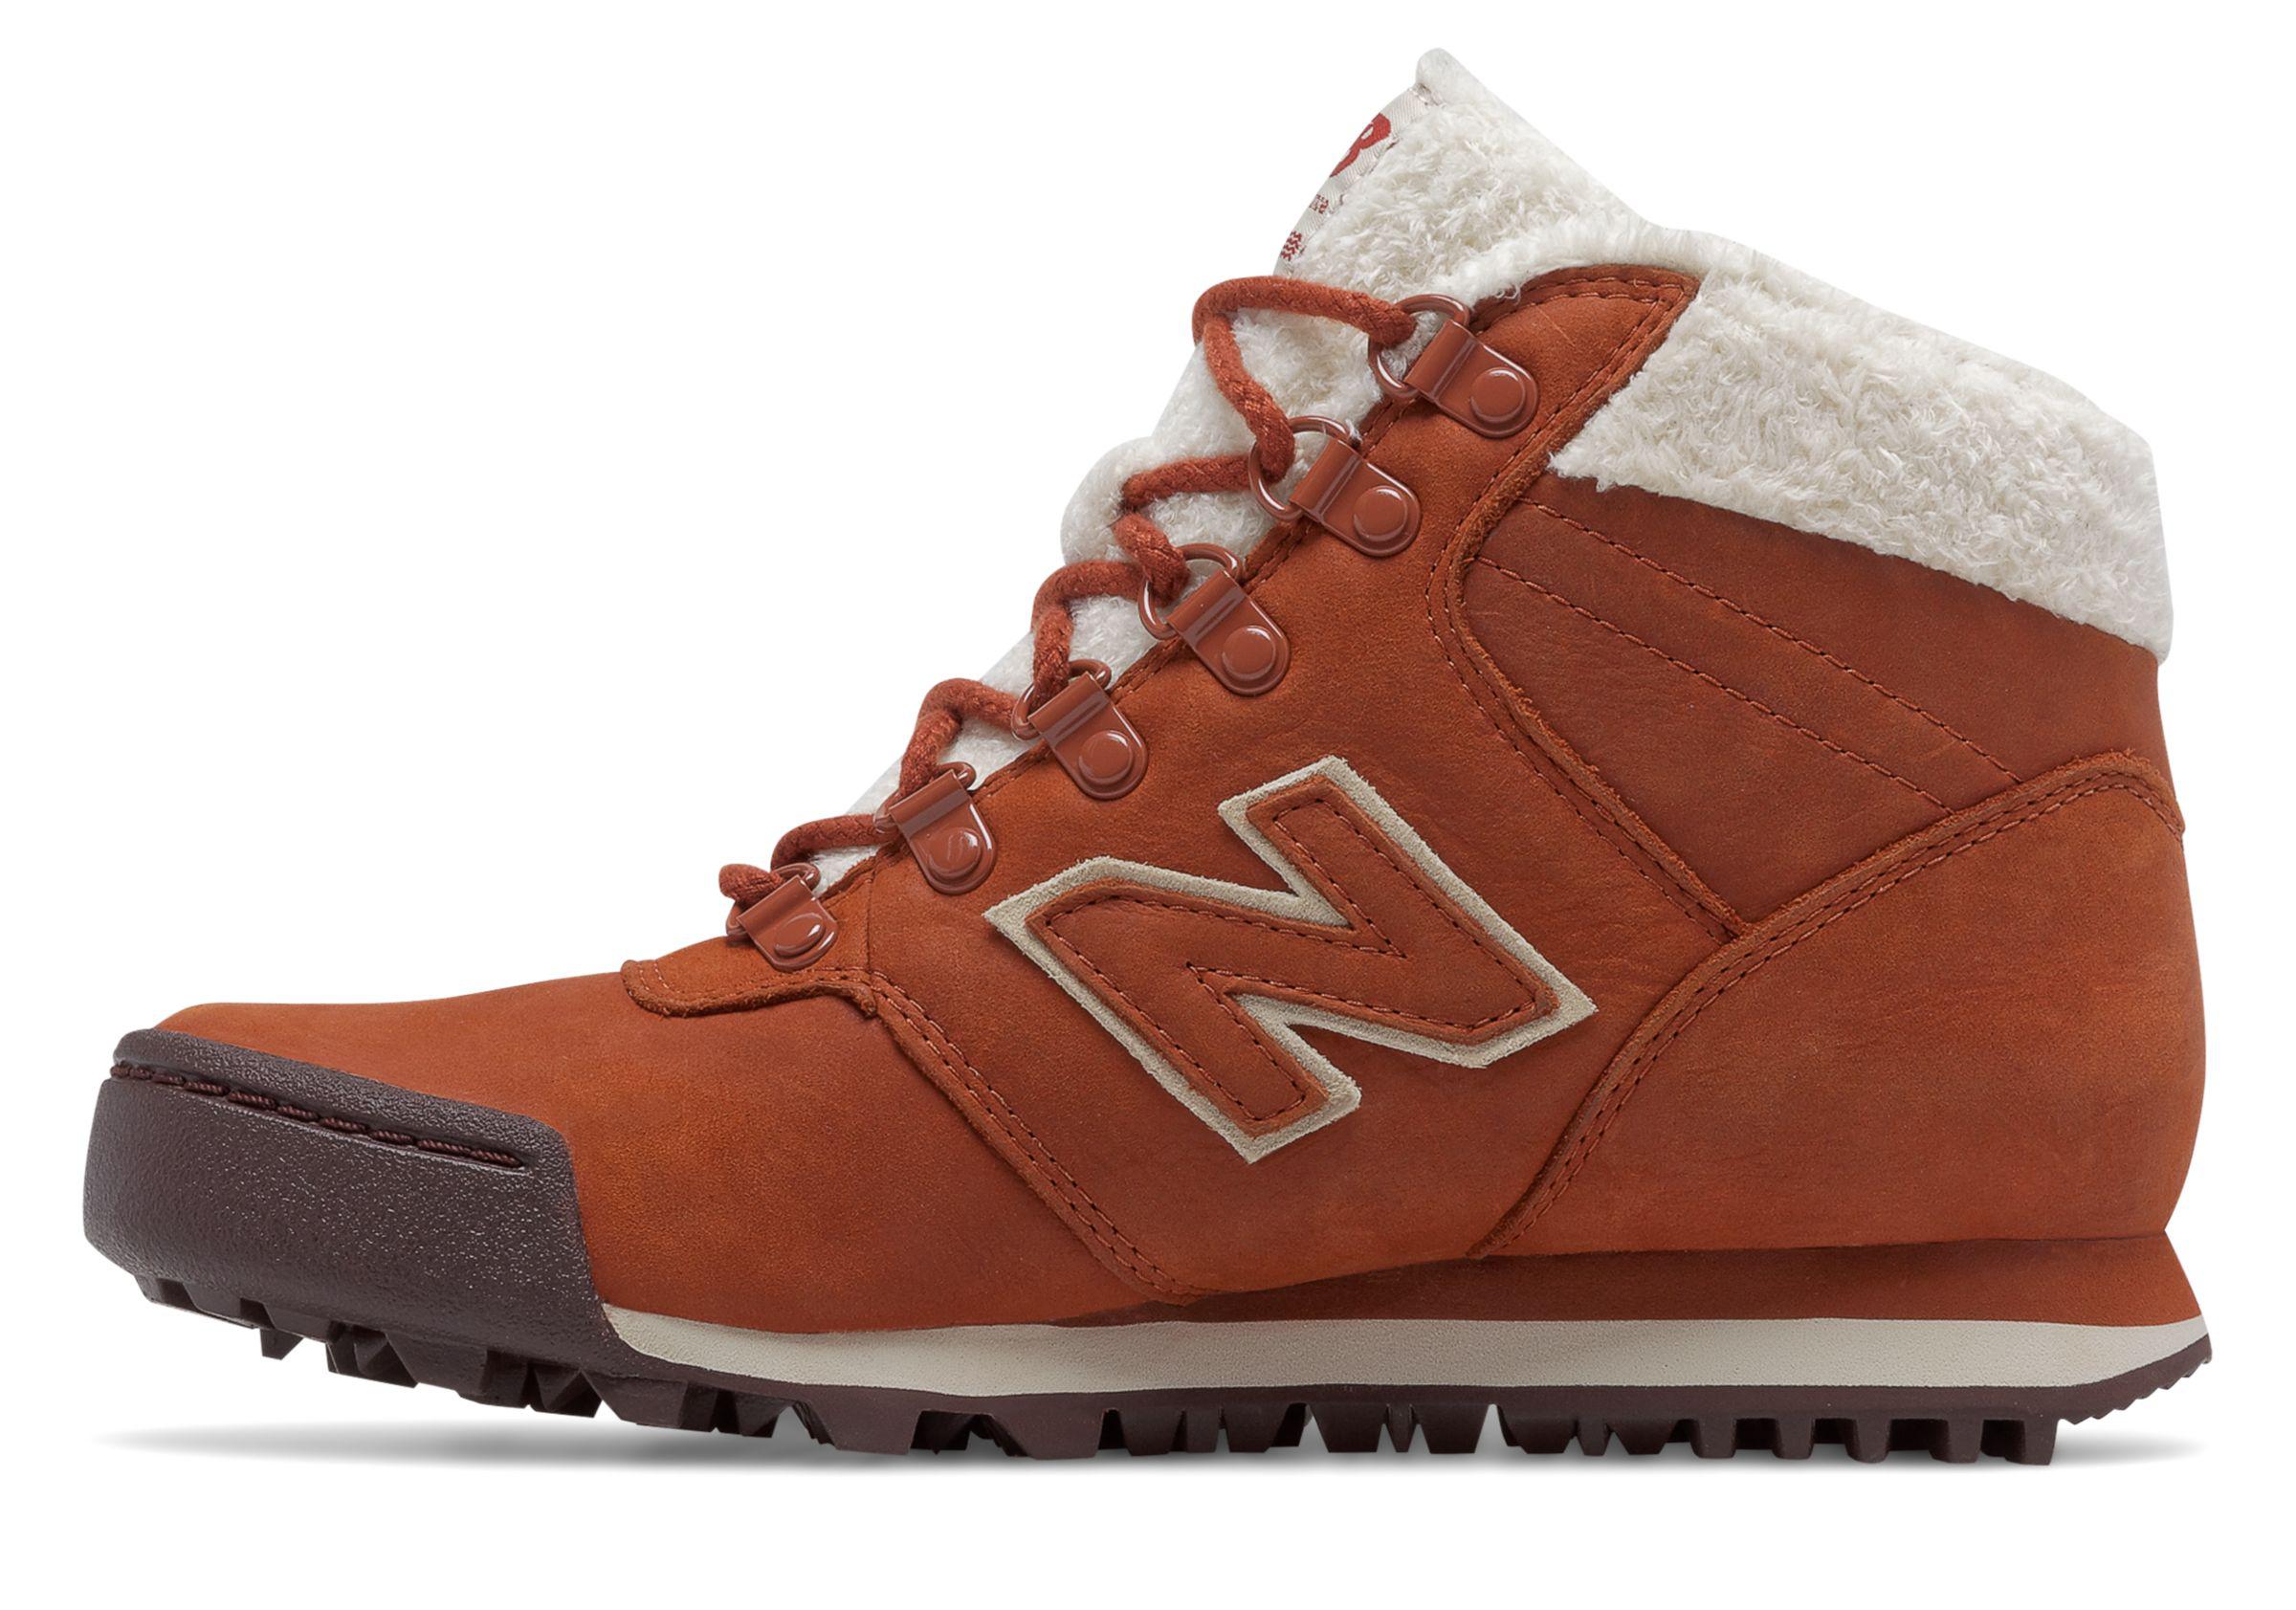 New Balance Leather 701 High-top sneakers in Brown for Men - Lyst